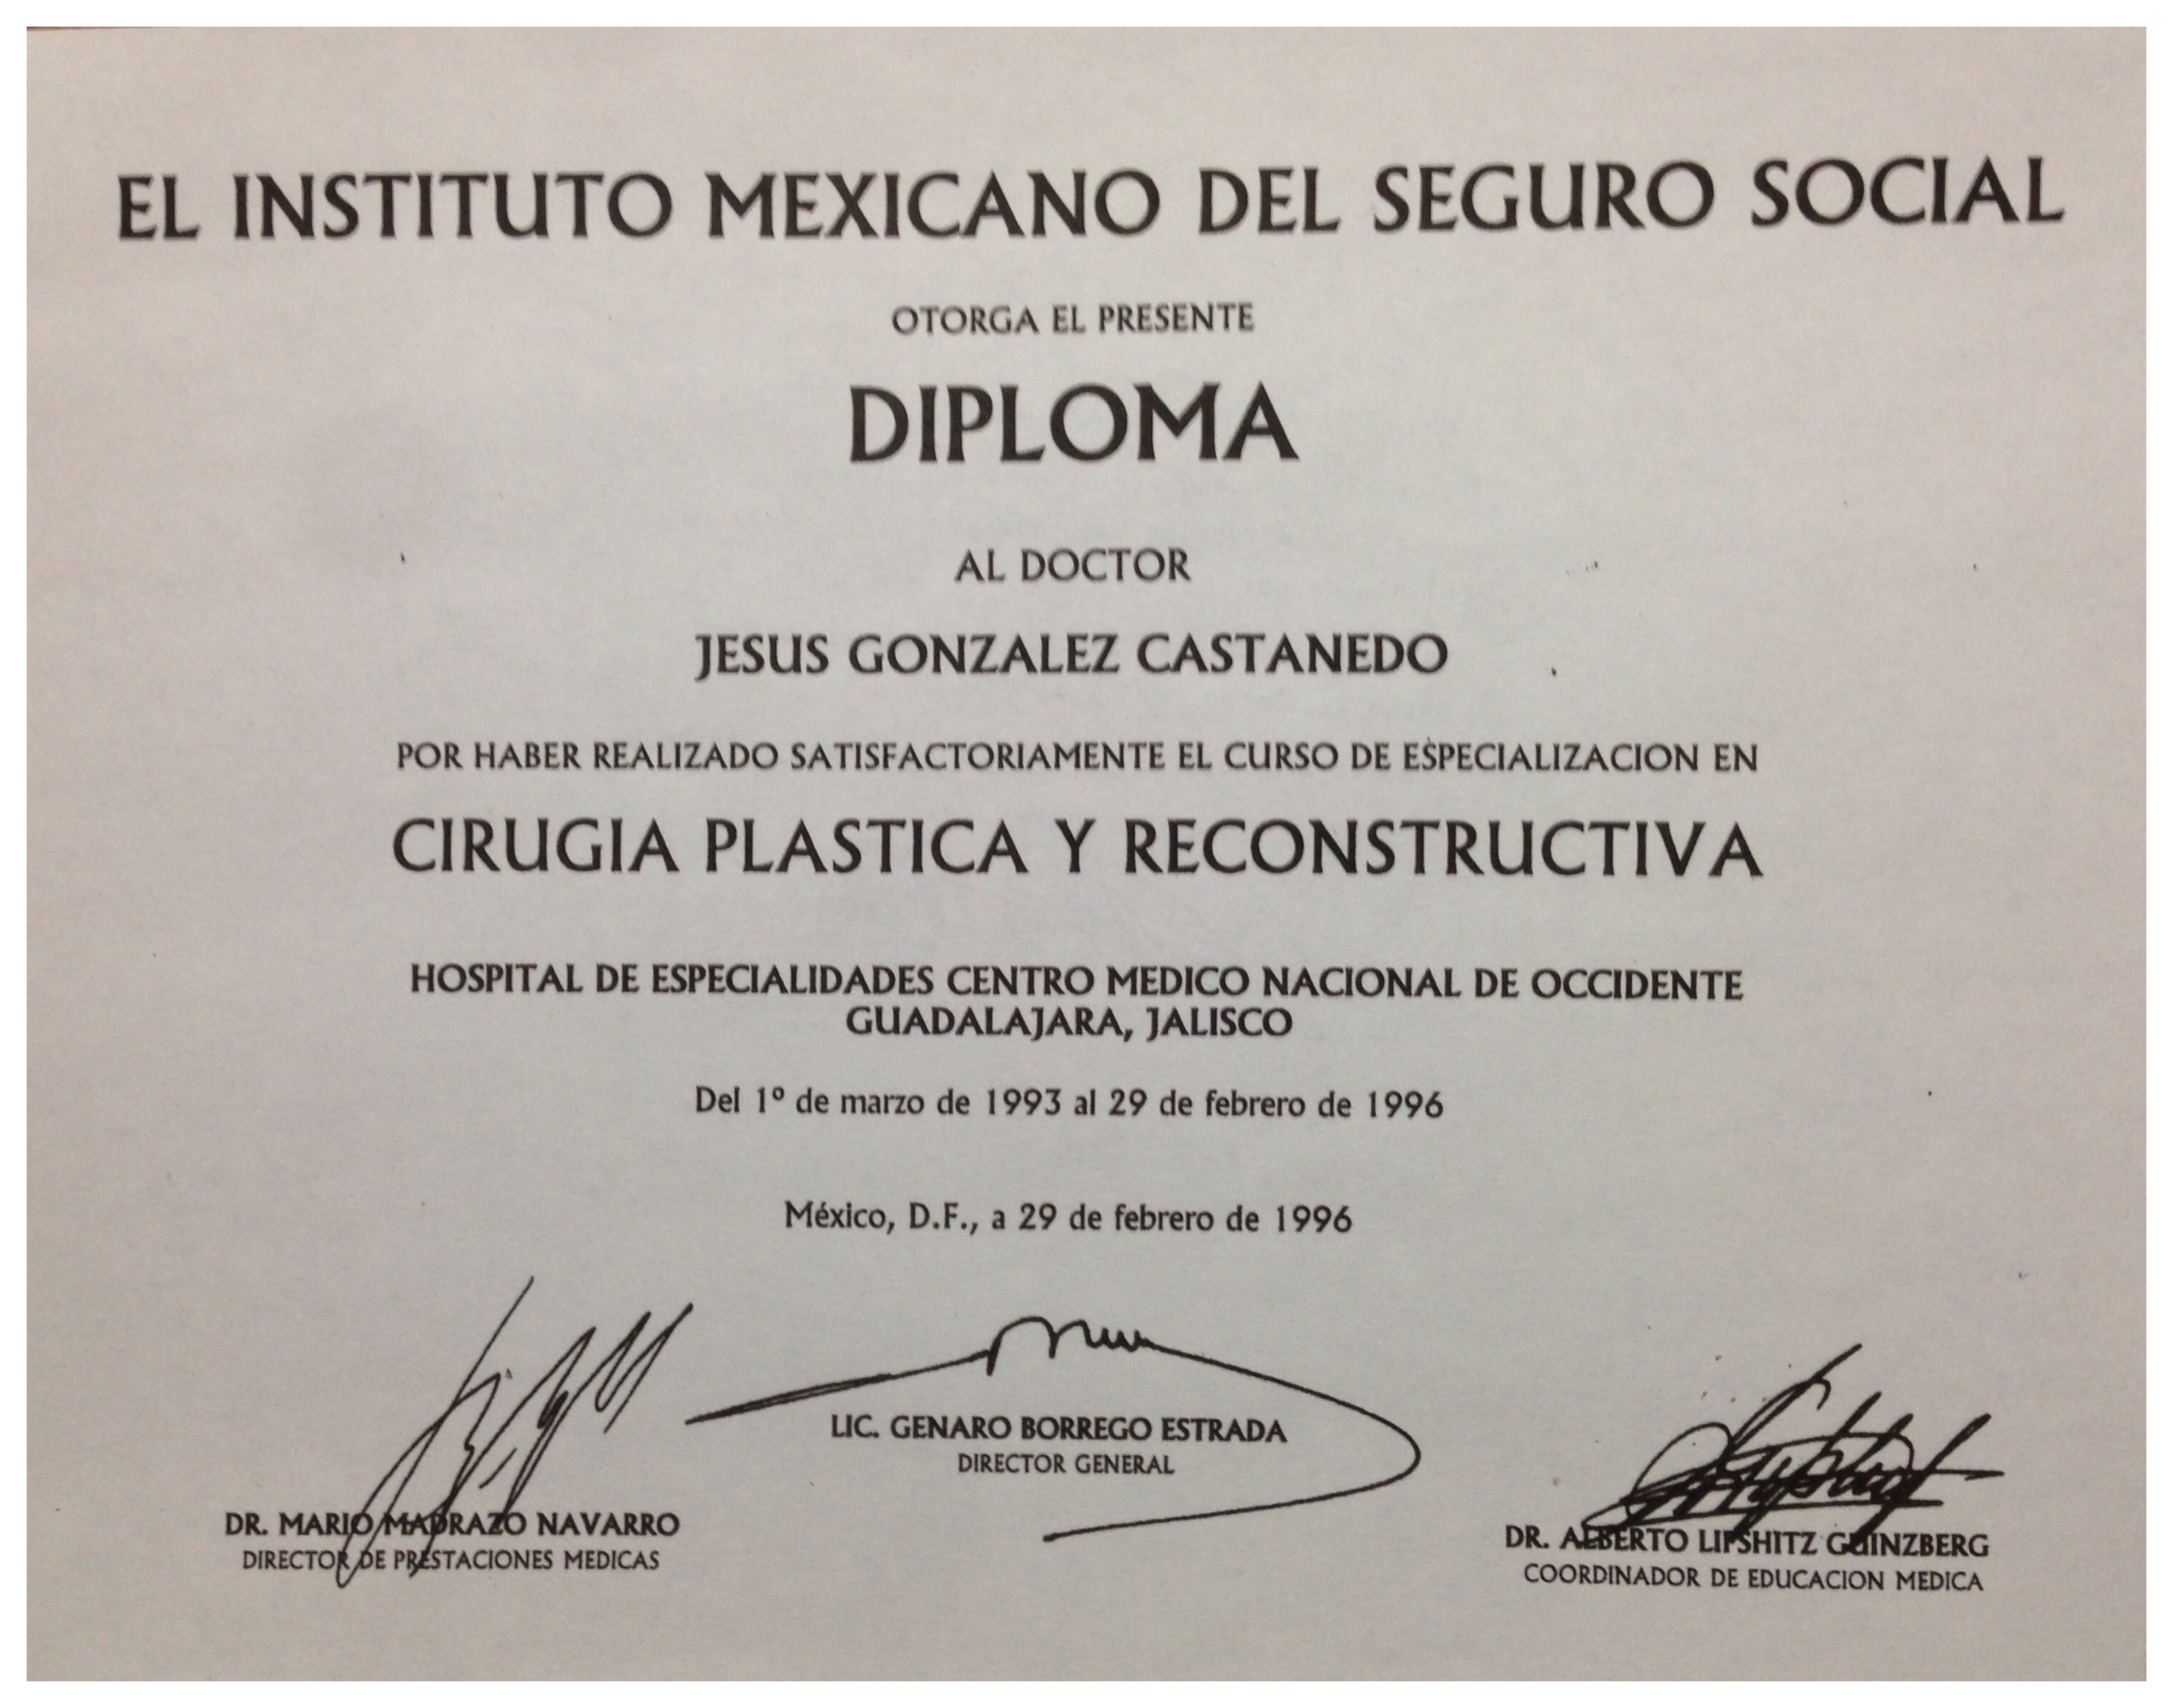 Mexican Institute of Social Security (IMSS) Diploma